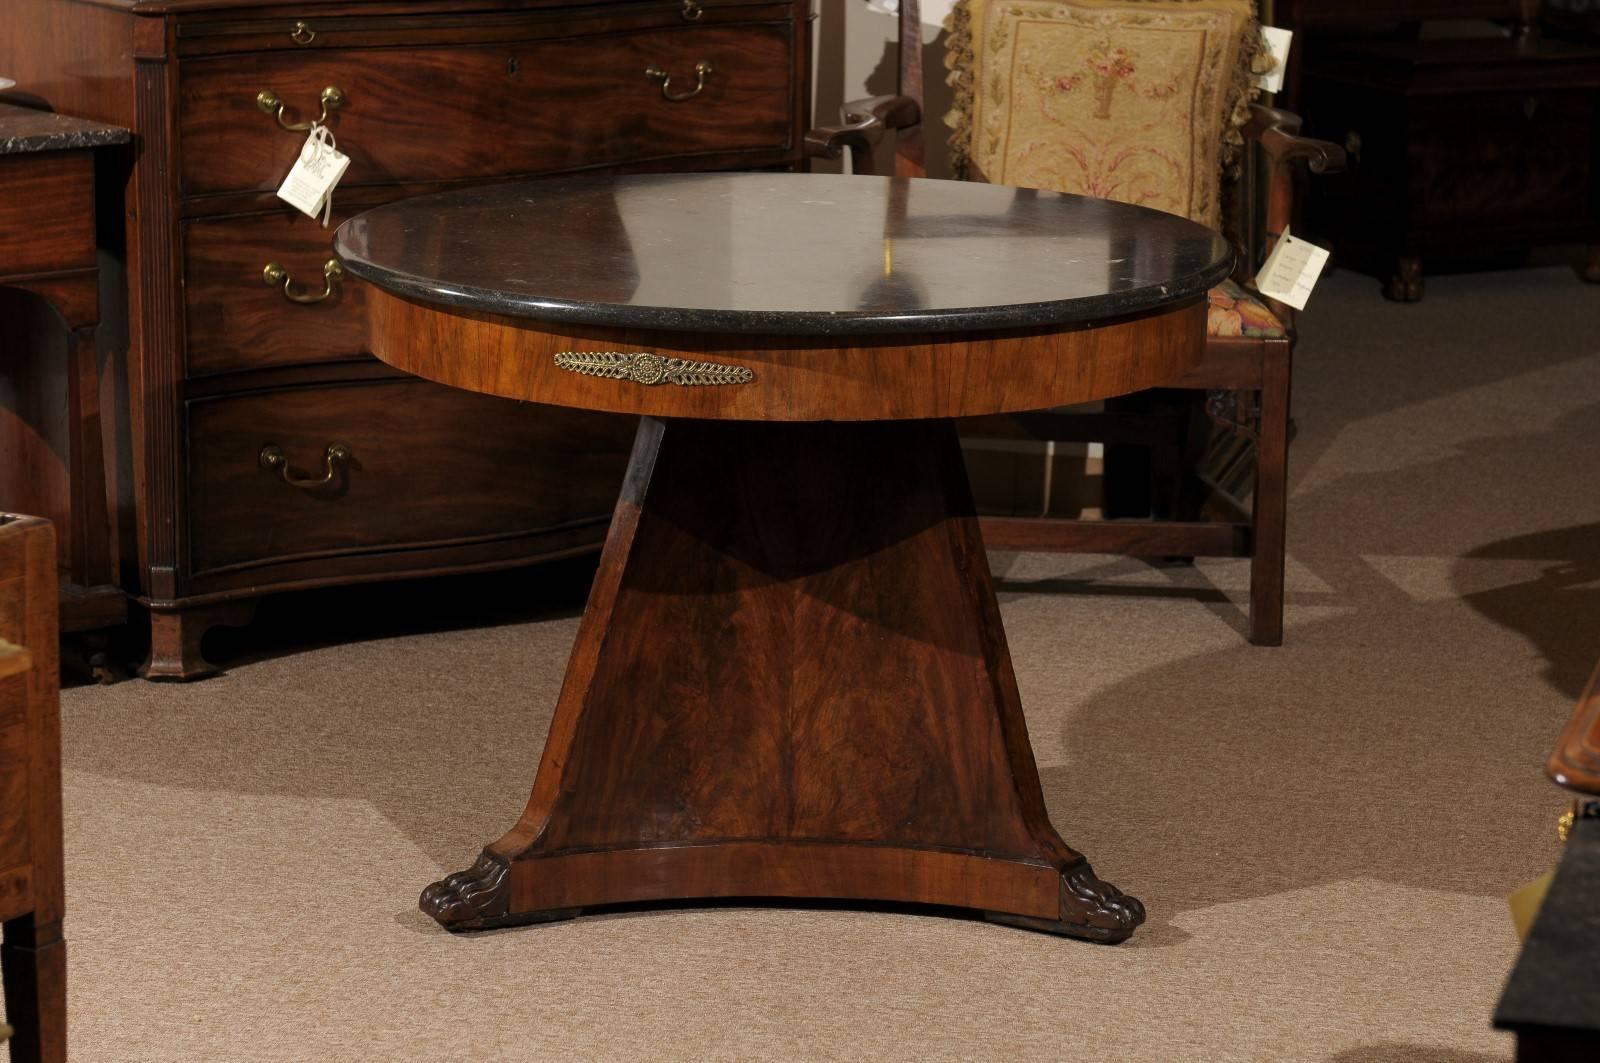 Walnut Empire period center table with paw feet and bronze doré mounts and grey marble top, France, 19th century.